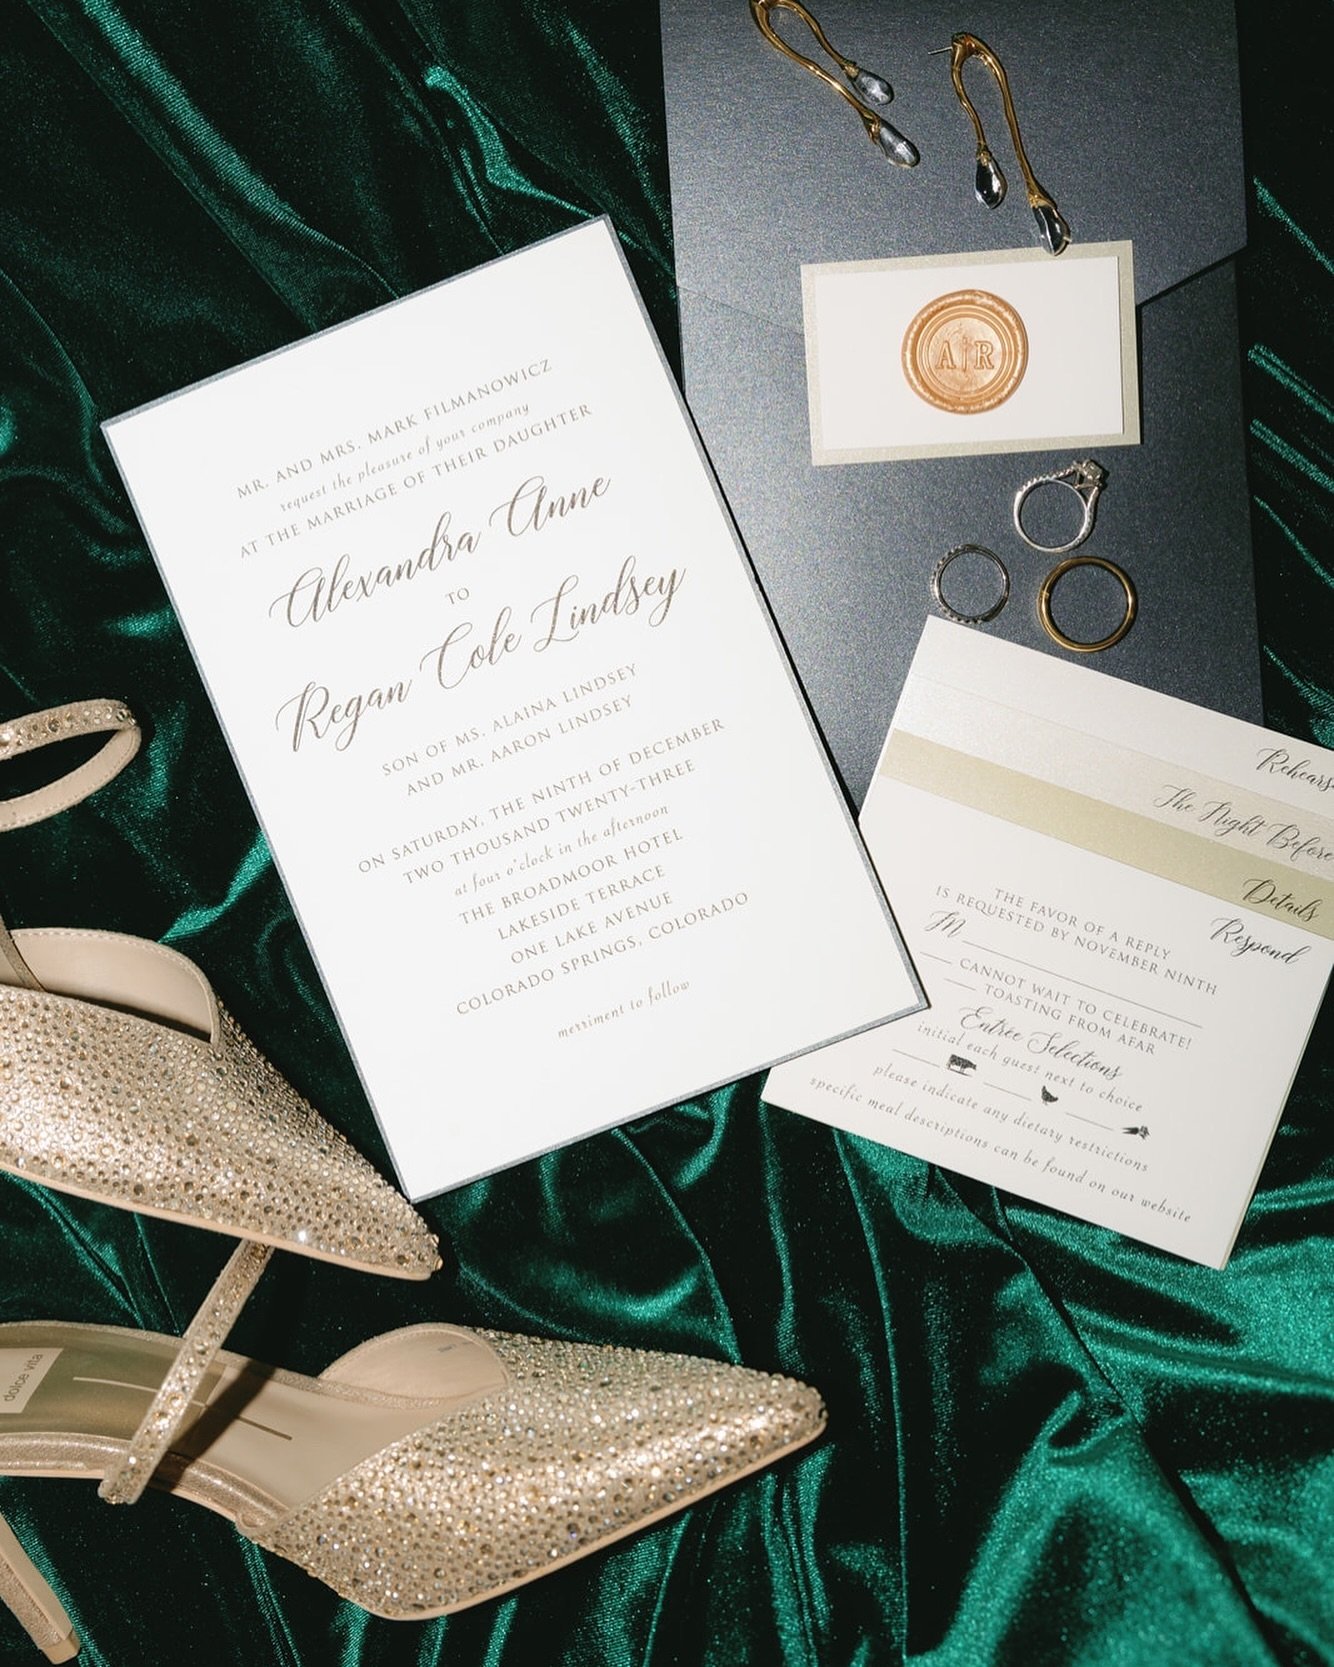 Custom invites vs. template
⠀⠀⠀⠀⠀⠀⠀⠀⠀
There are so many different ways to get the word out about your special day. You can use a template site or you can go completely custom like this invite from @fdlpaperie 

Templates are quick, easy and usually c